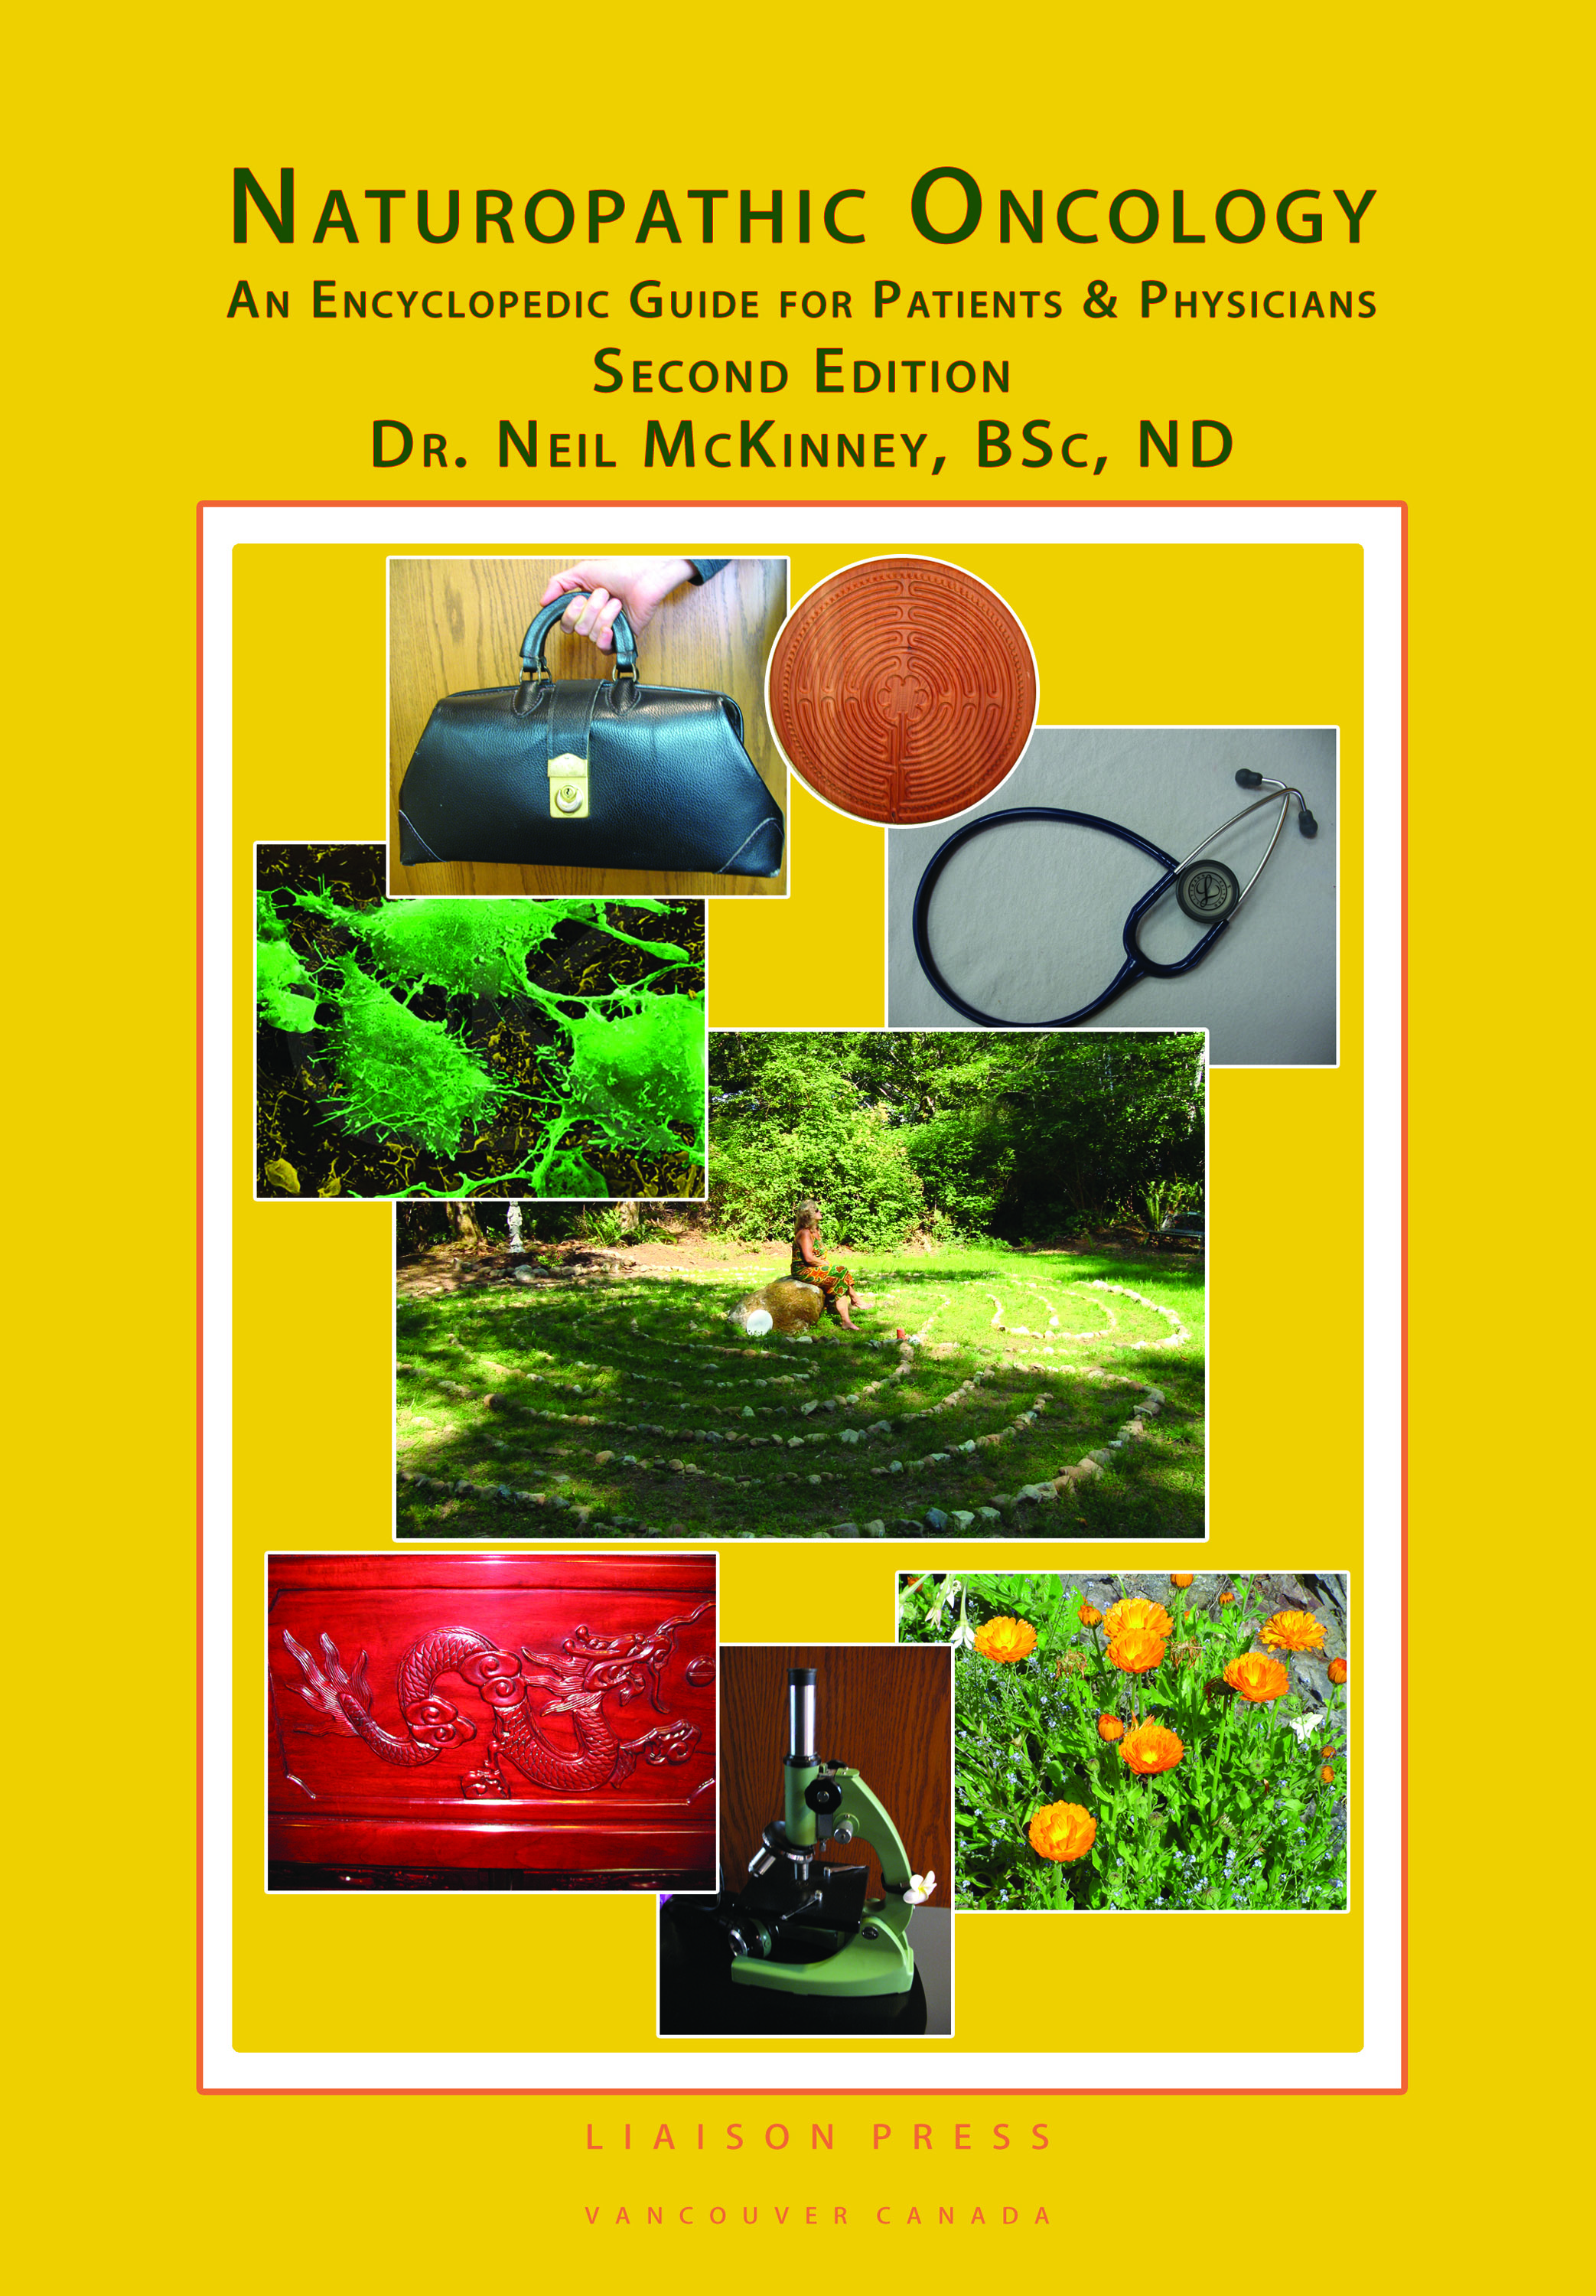 Dr McKinney Naturopathic Oncology 2nd Edition